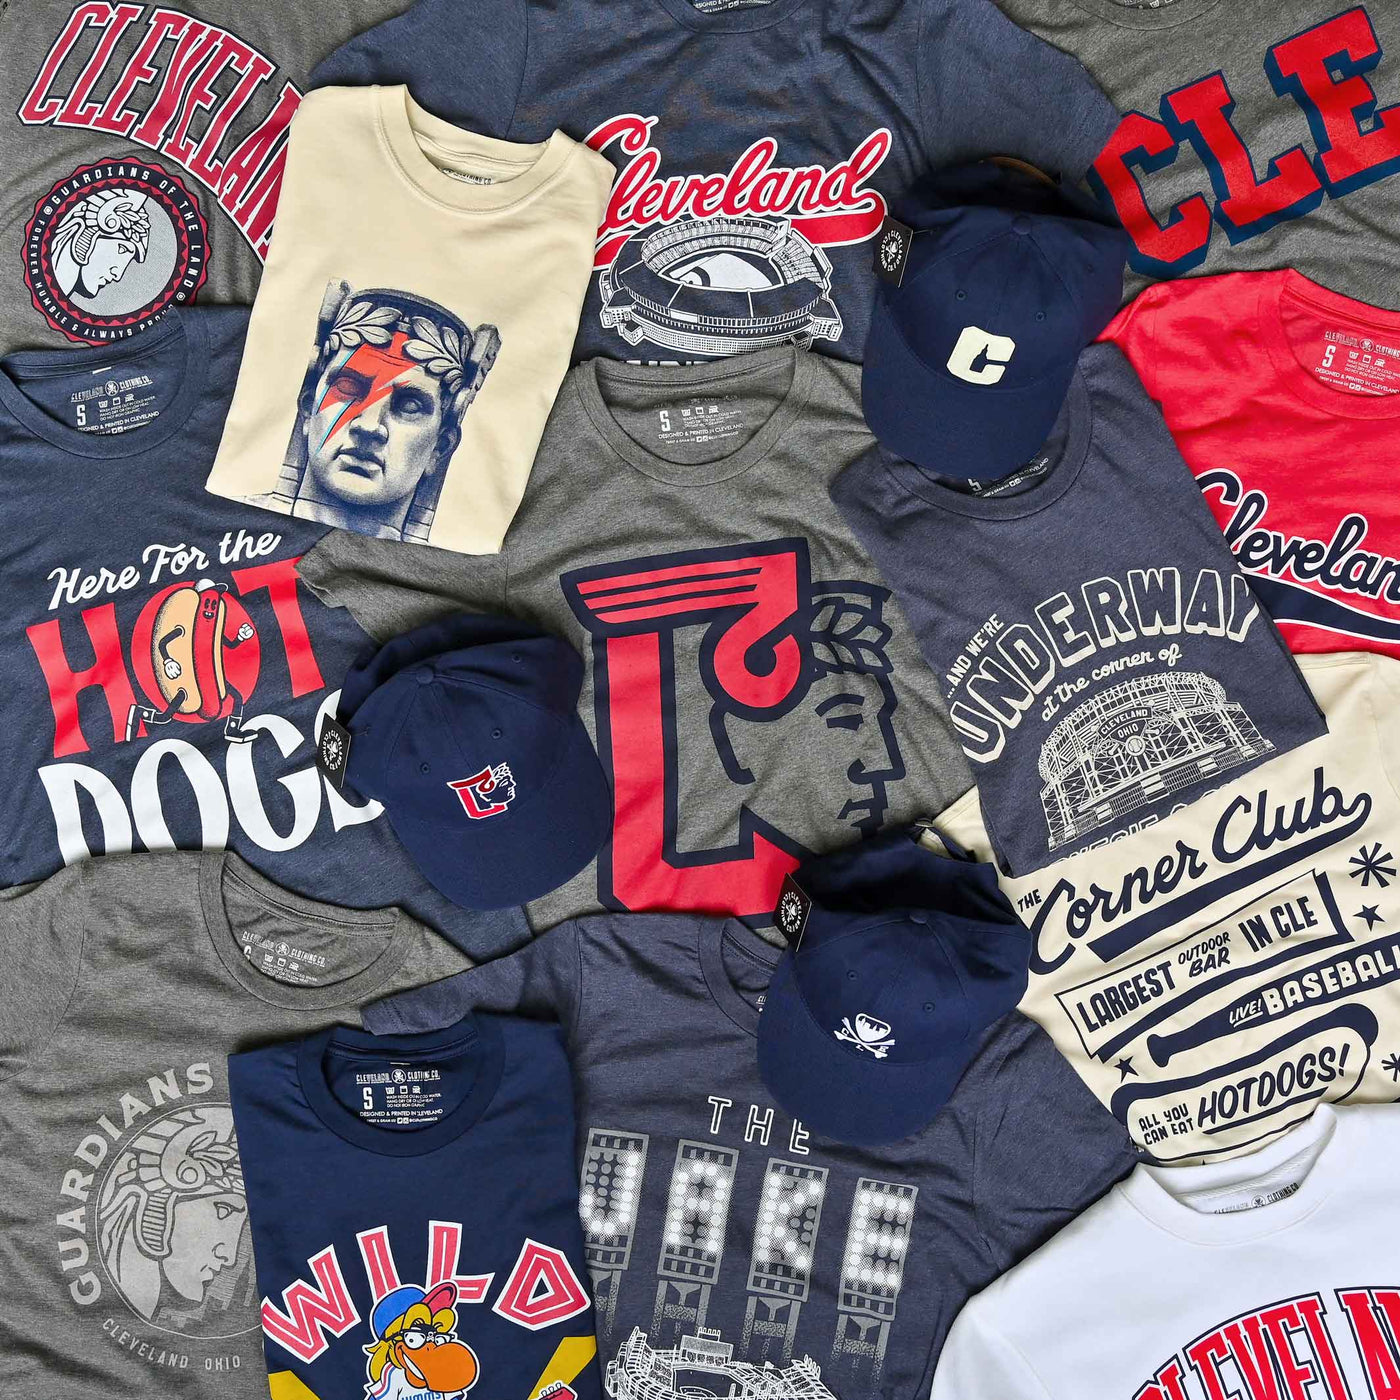 T-Shirts of Cleveland Indians for Men, Women and Youth